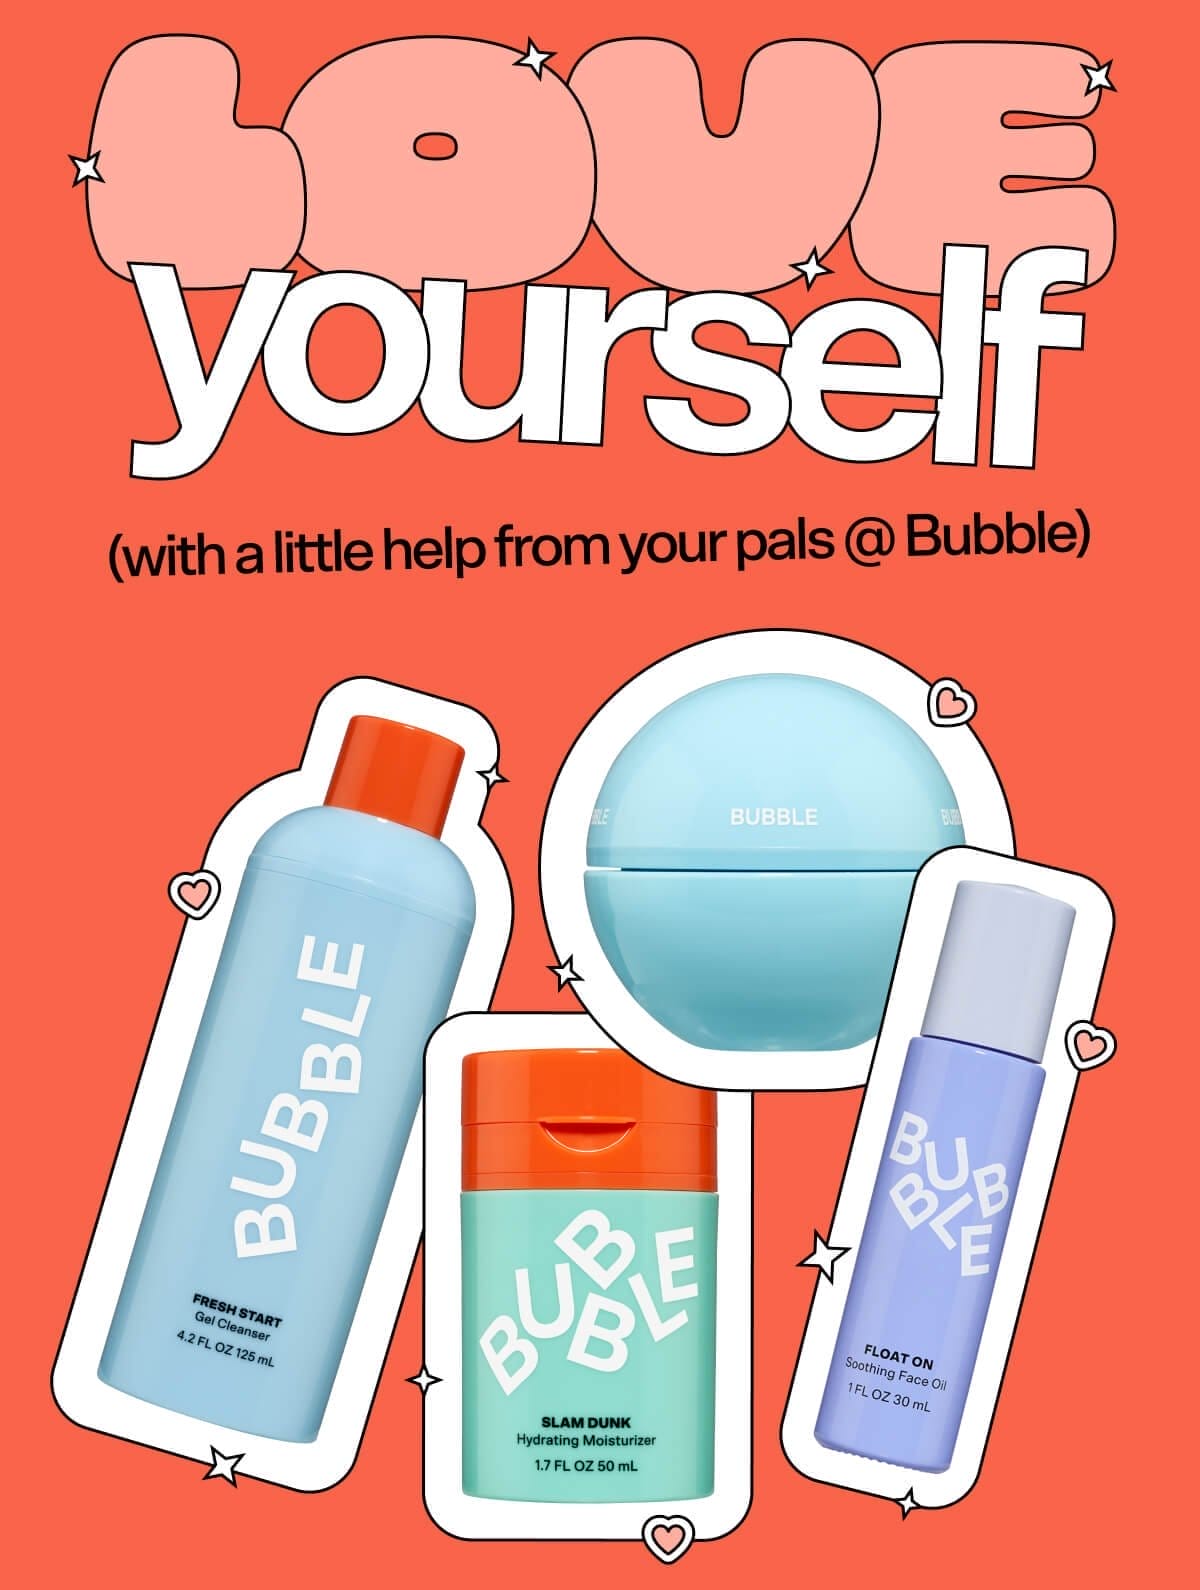 Love Yourself (with a little help from your pals @ Bubble)